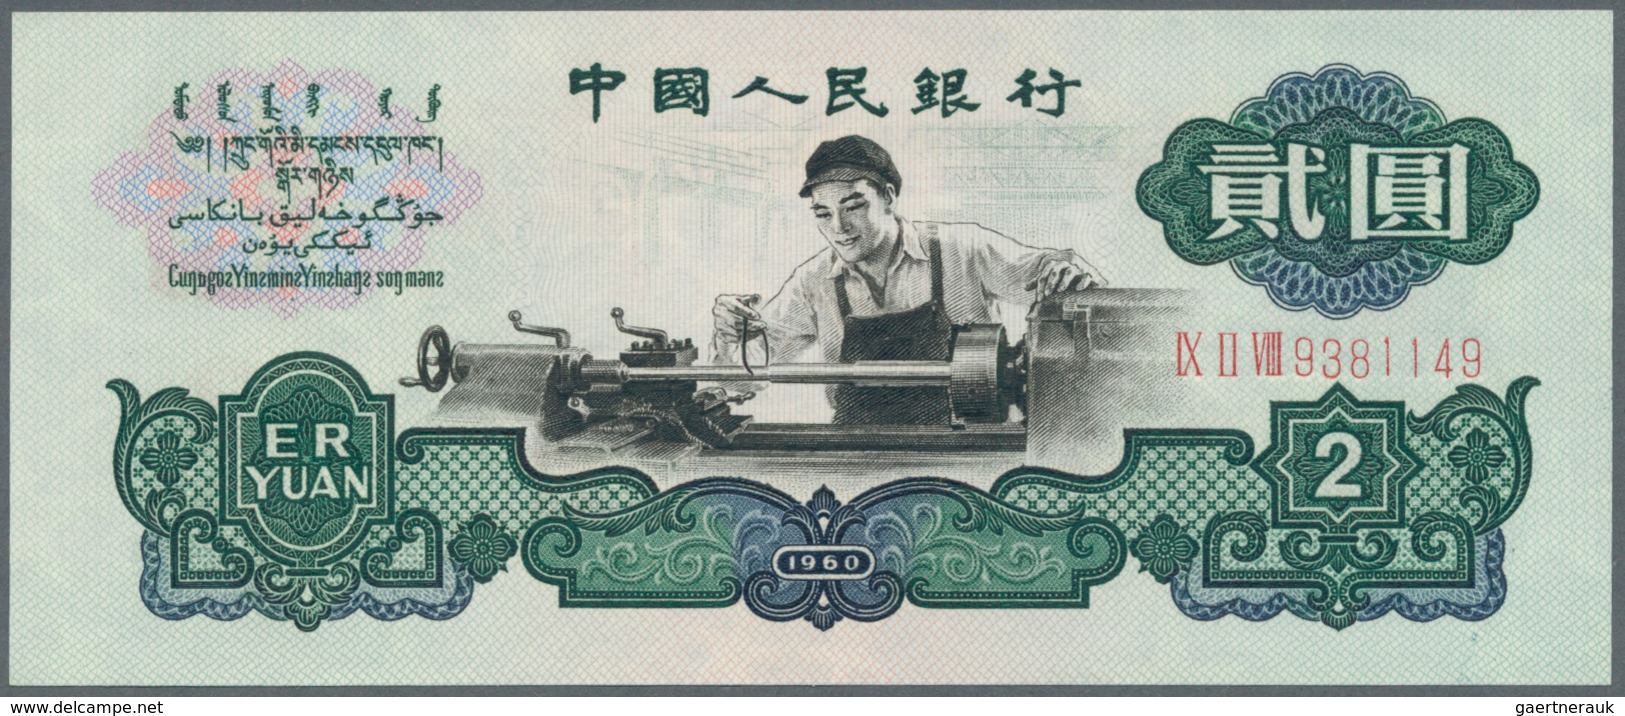 01305 China: 2 Yuan 1960 P. 875a, Crisp Paper, One Vertical Fold, Condition: XF To XF+. - China